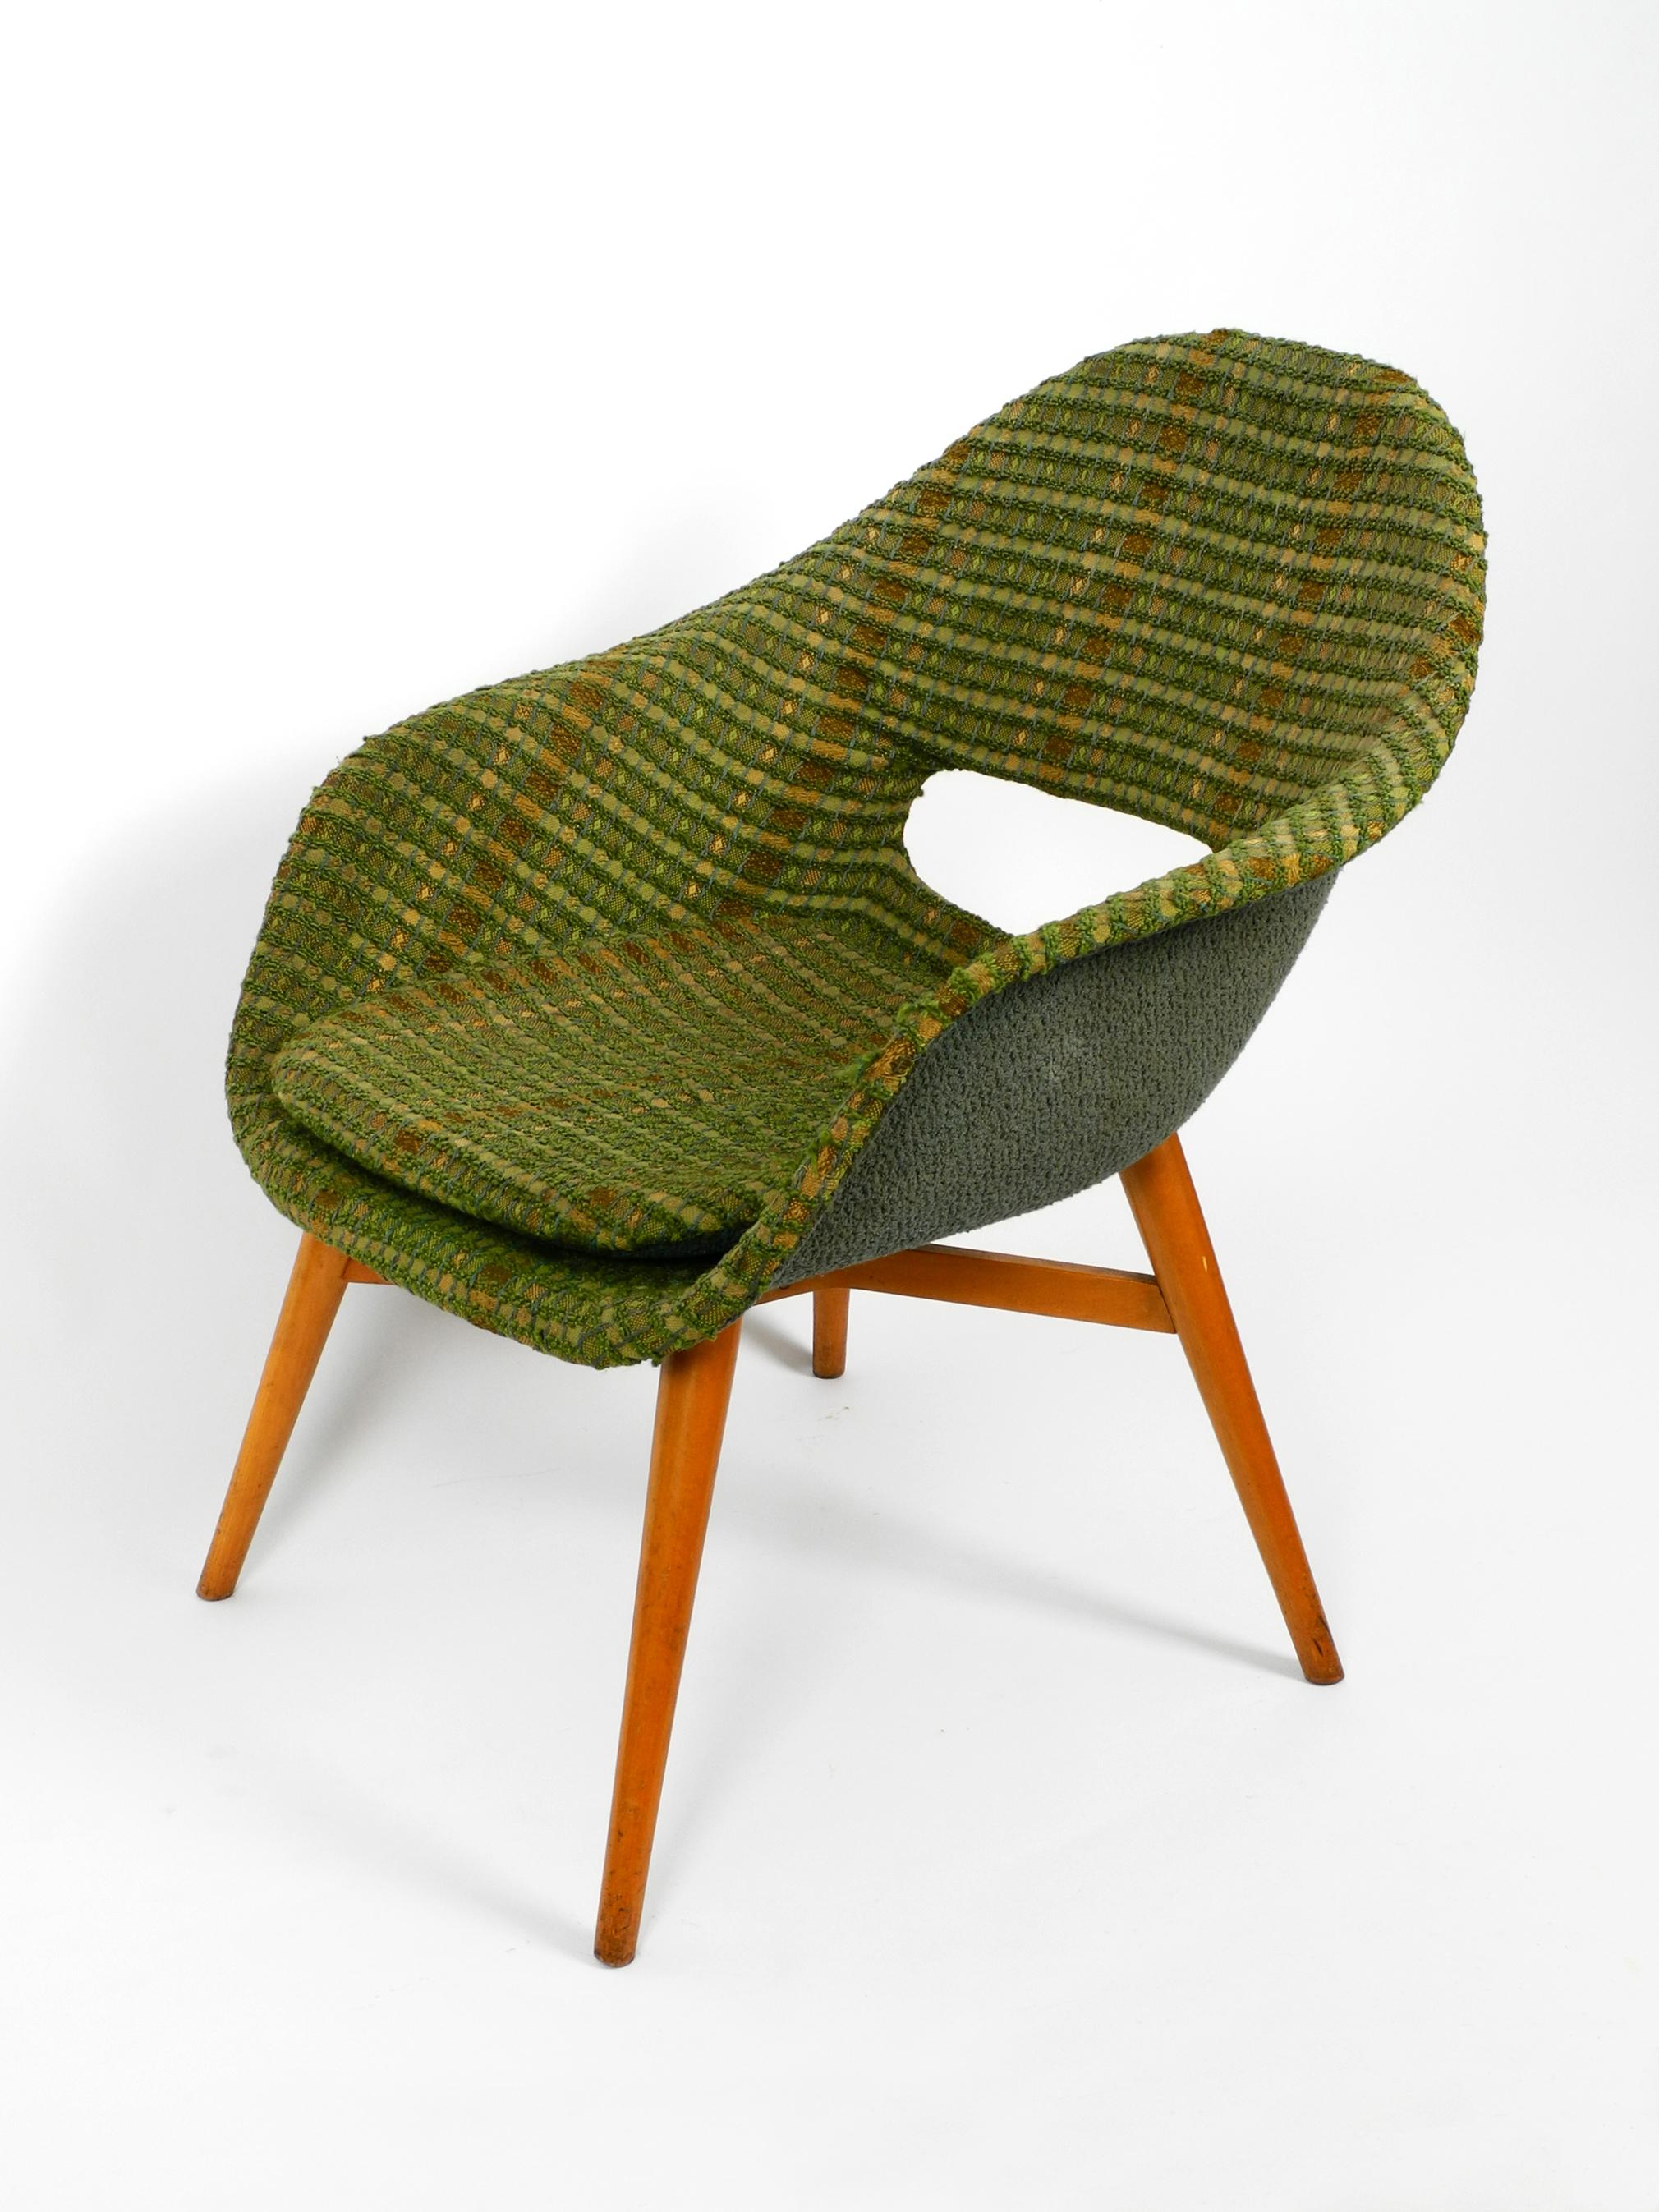 1960s Lounge Chair by Miroslav Navratil with Fiberglass Shell and Original Cover 4